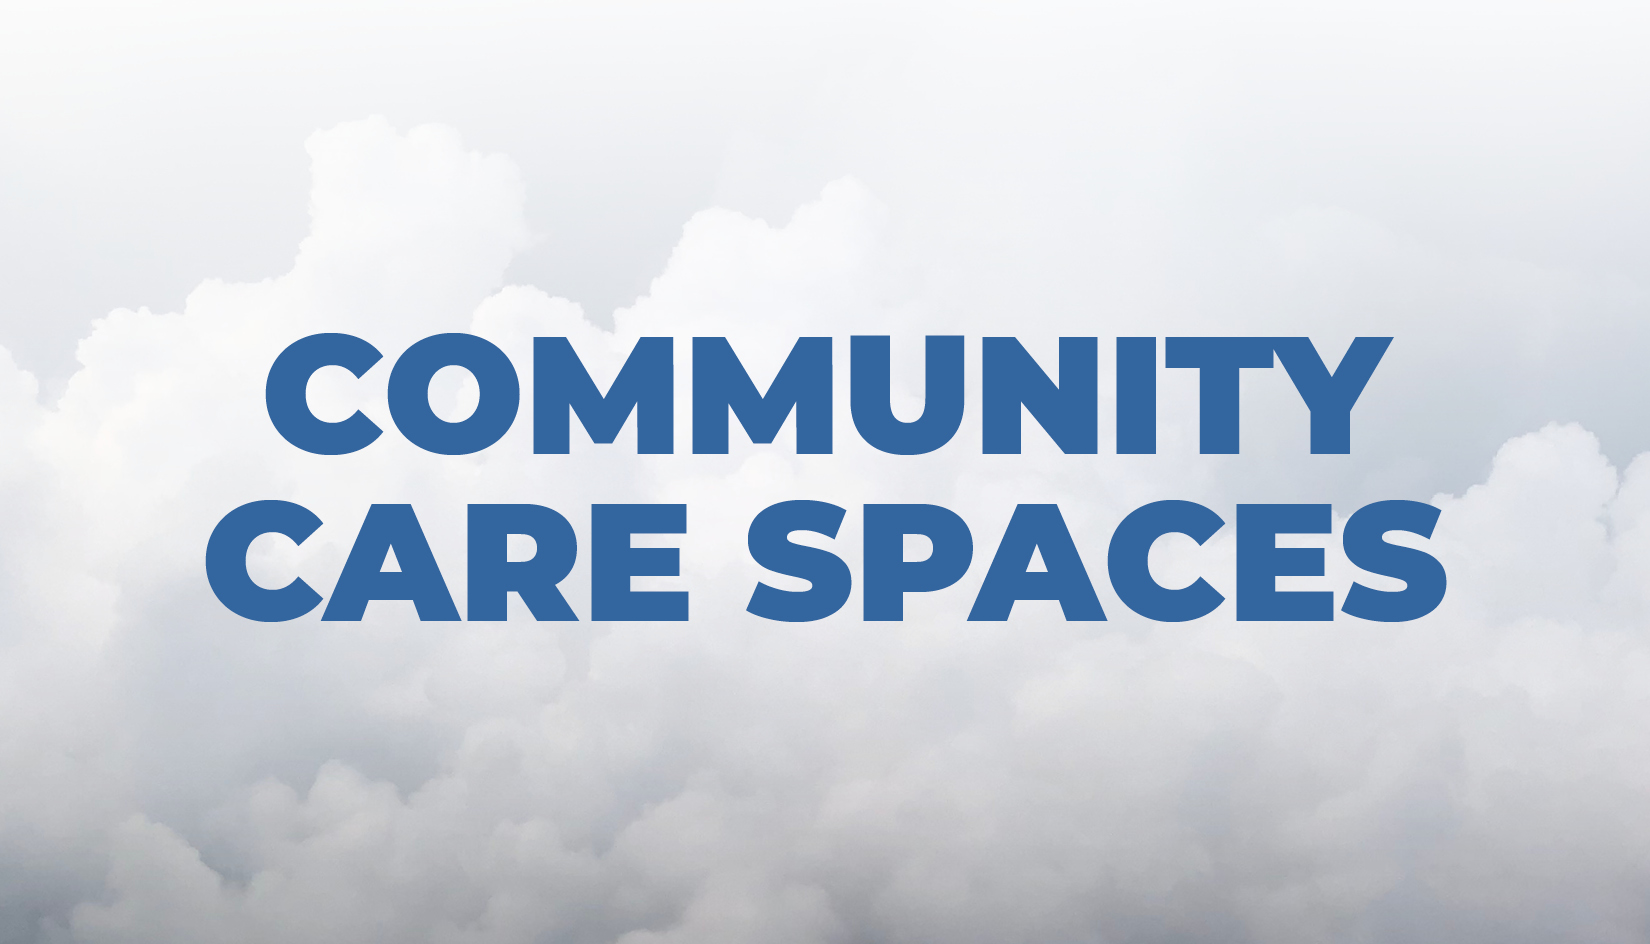 Dark blue title text reads "Community Care Spaces" against grey clouds